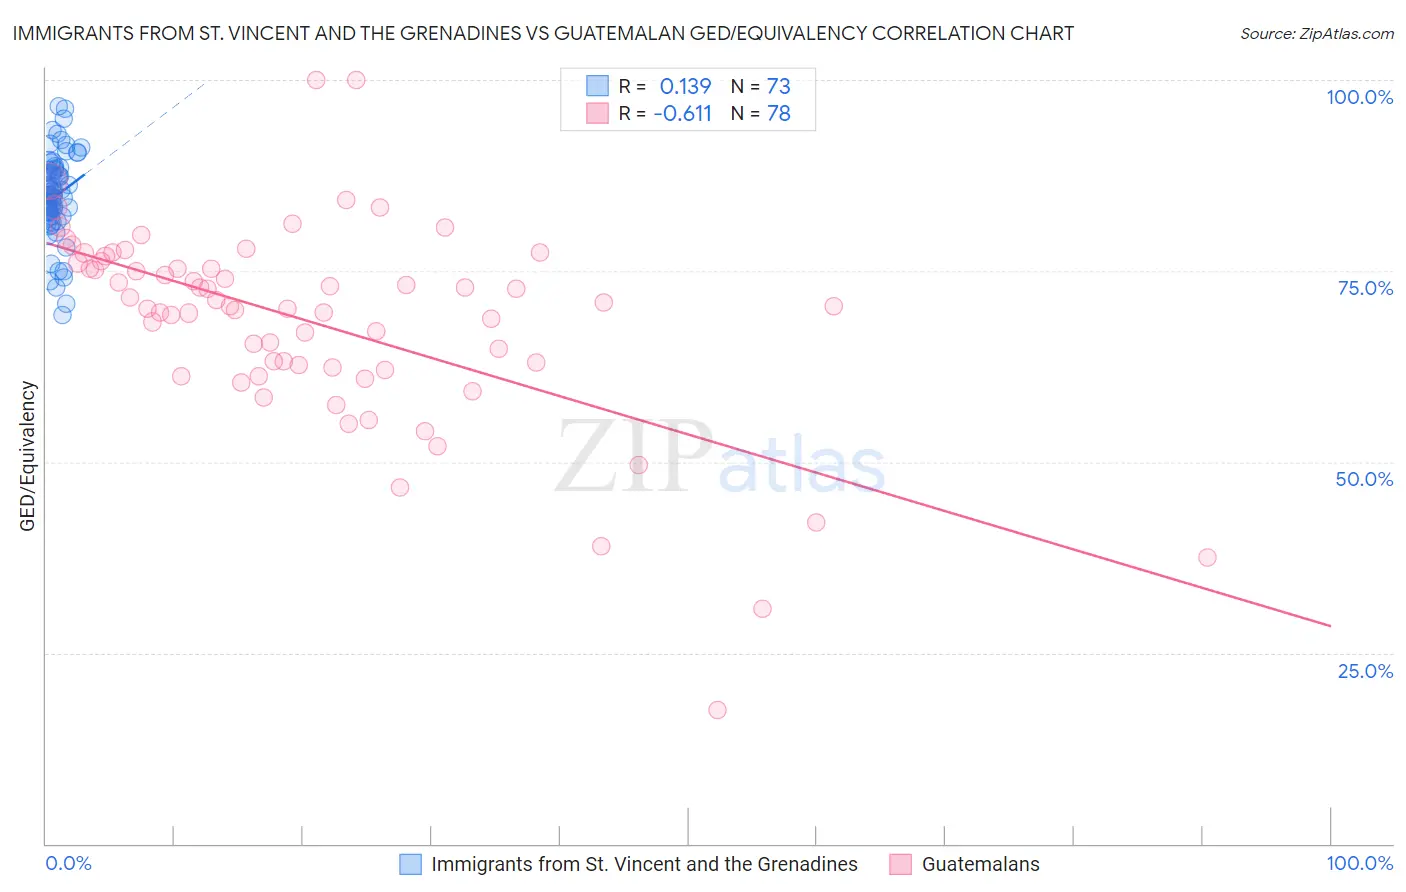 Immigrants from St. Vincent and the Grenadines vs Guatemalan GED/Equivalency